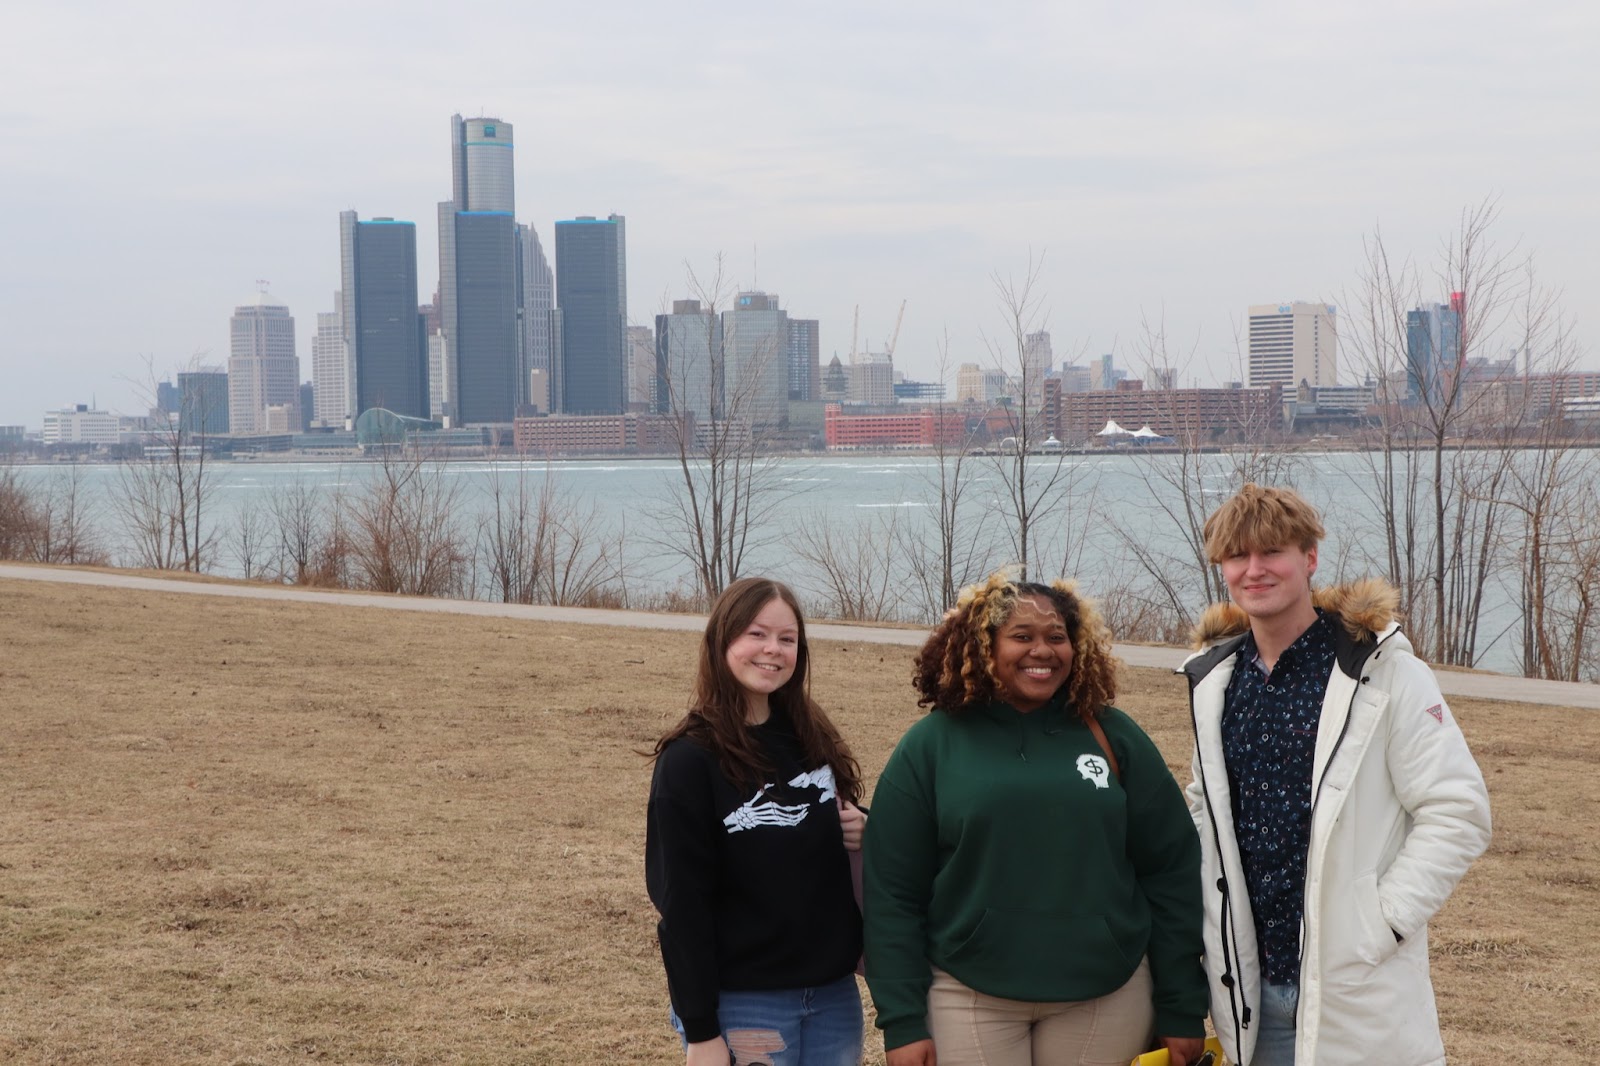 Students Nicole Greenen, MacKenzie Thompson, and Zackary Weber in Windsor, with the Detroit skyline behind them